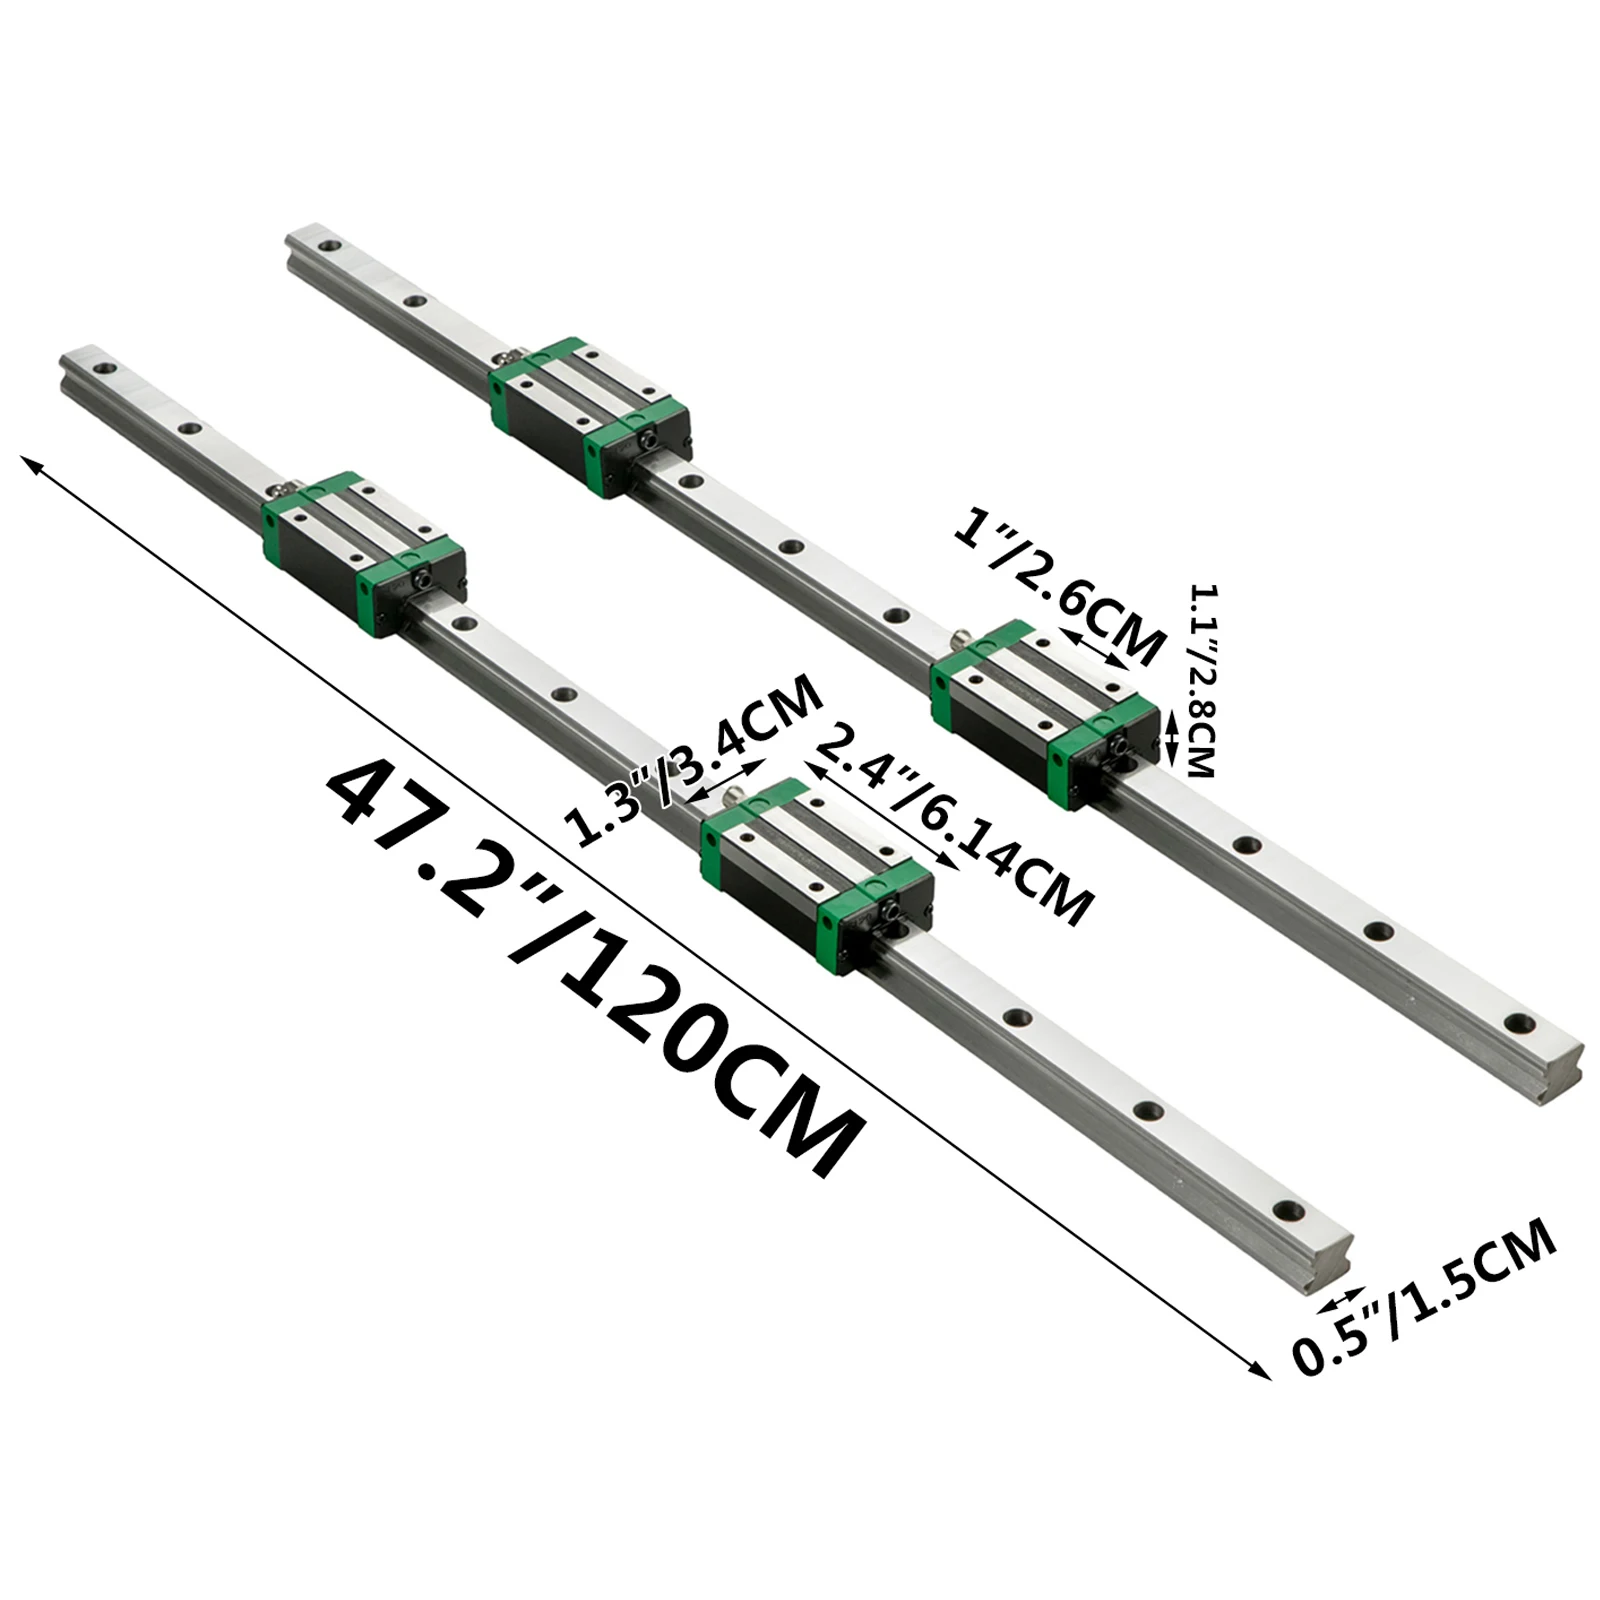 VEVOR Linear Guideway Rail Linear Slide Guide Rails HSR15/HSR20 300mm-2000mm with Bearing Block for DIY CNC Routers Lathes Mills images - 6